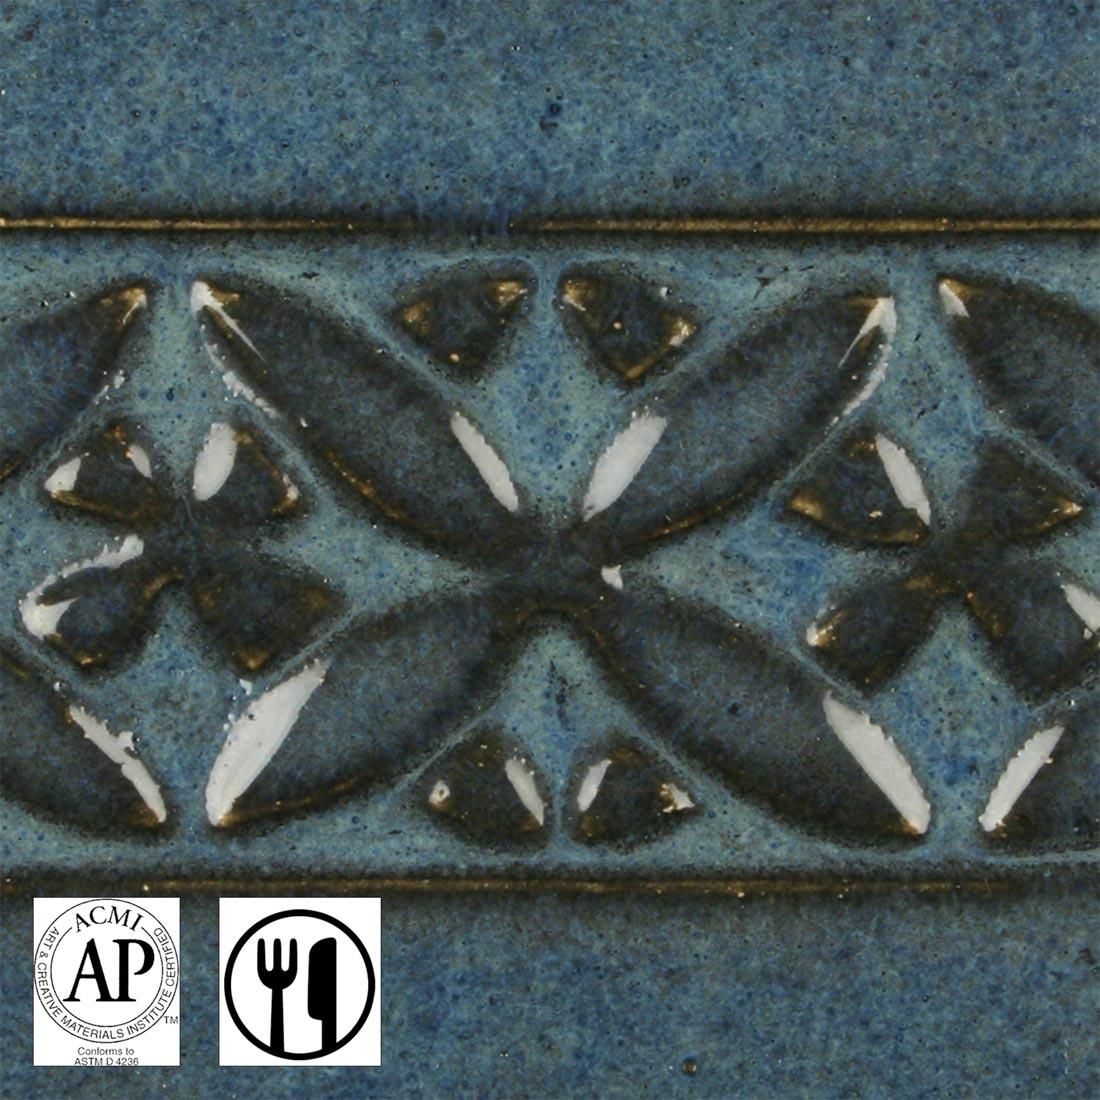 clay tile with Midnight Blue AMACO Potter's Choice High Fire Glaze applied; symbols for AP Seal and food safe